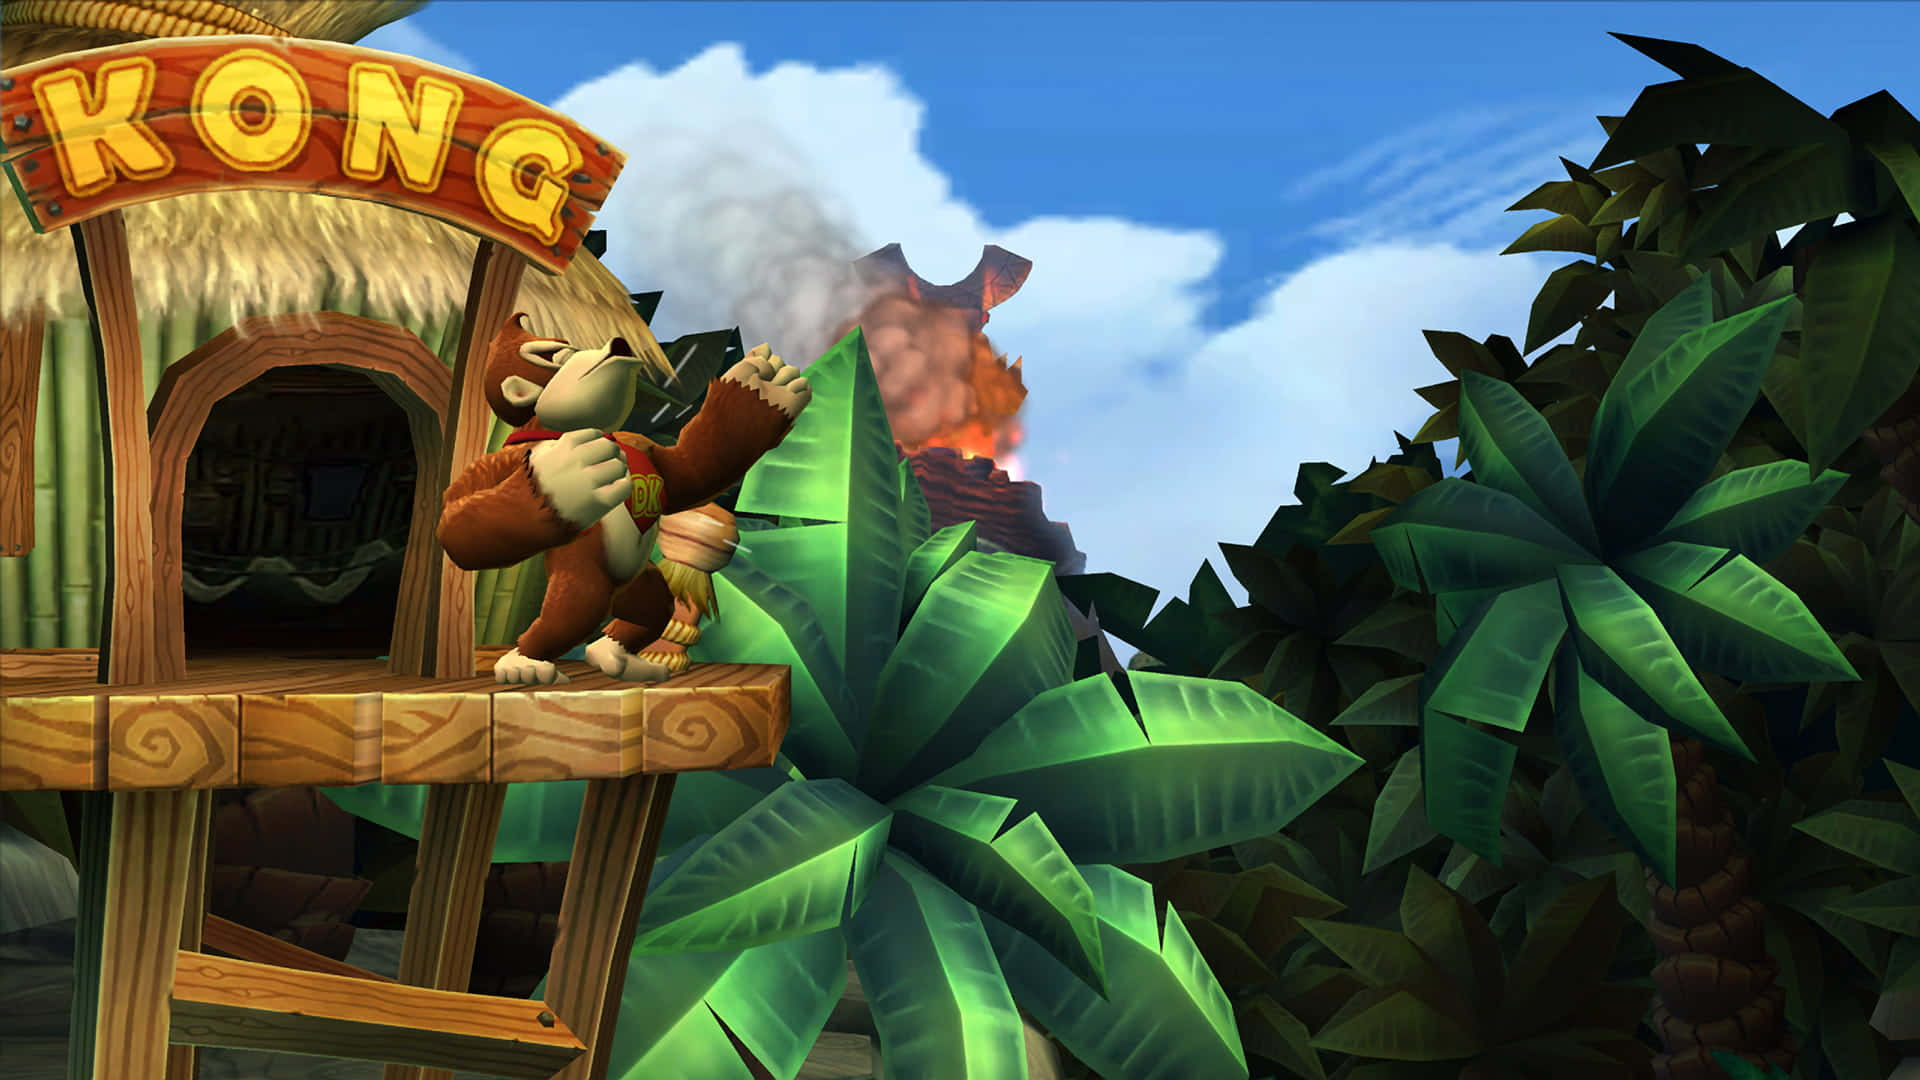 Donkey Kong Standing Heroically In A Jungle Environment Background